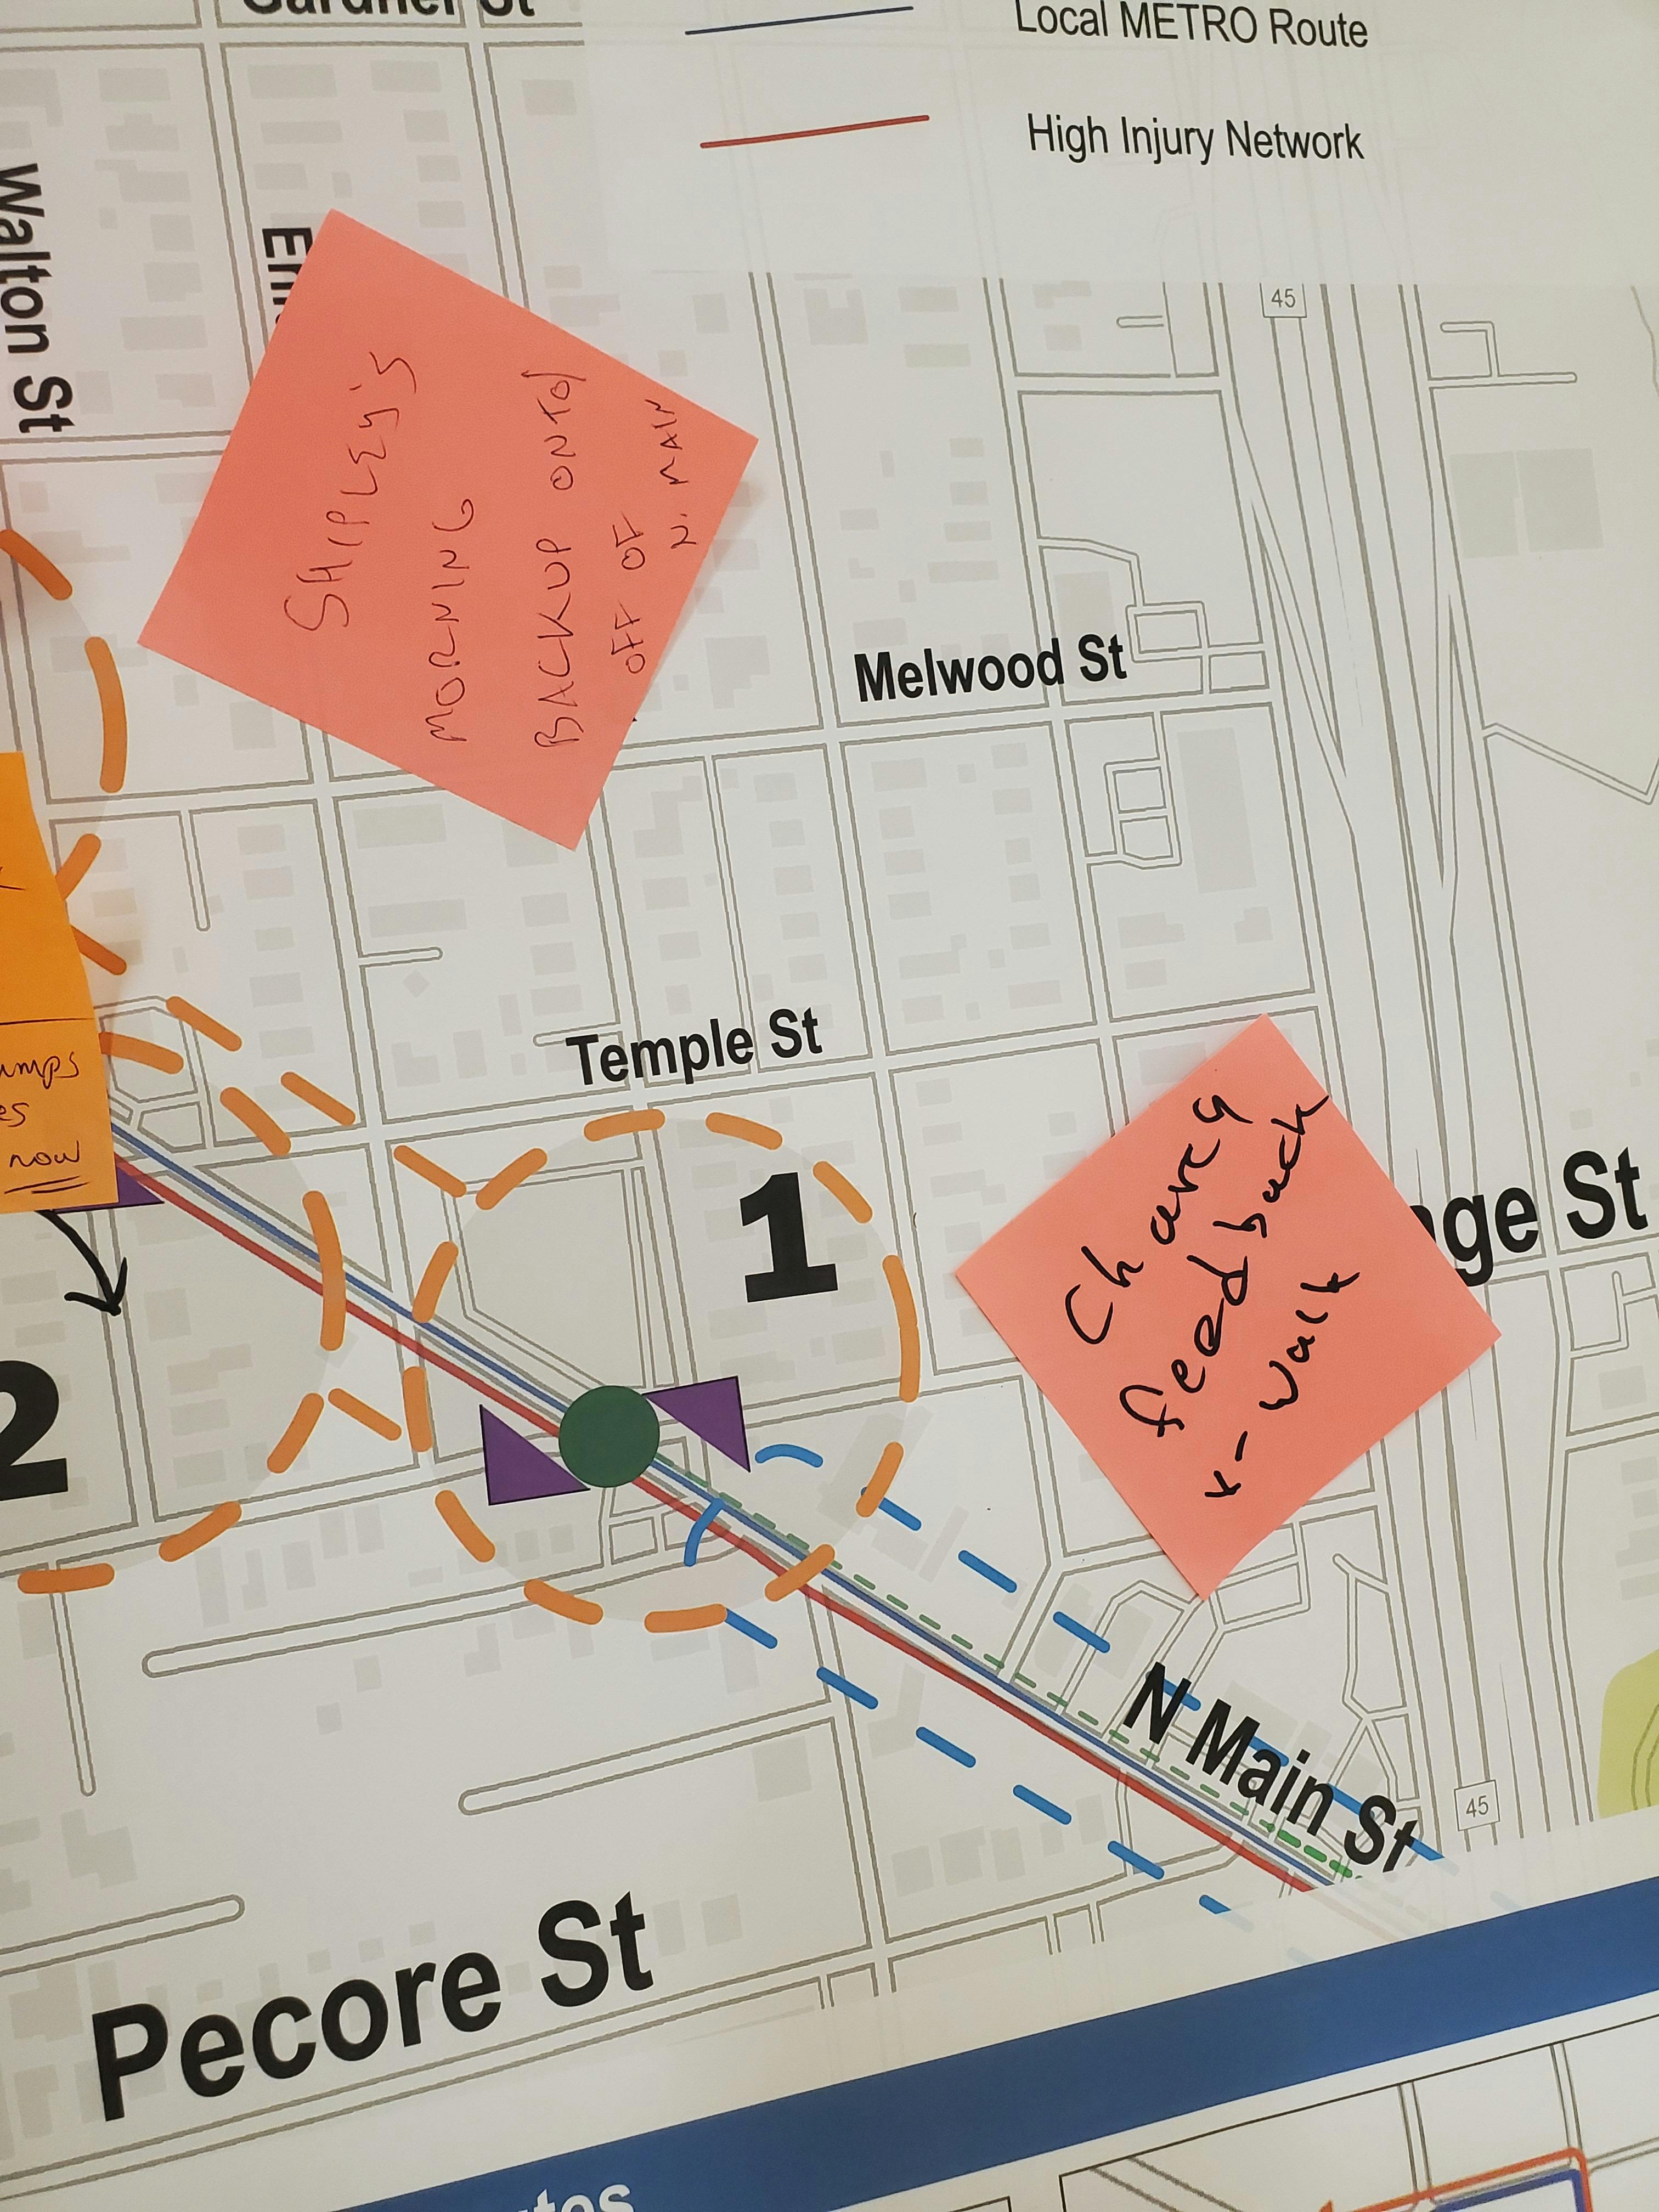 Comments on Proposed Travel Patterns Phase 2 Posterboard